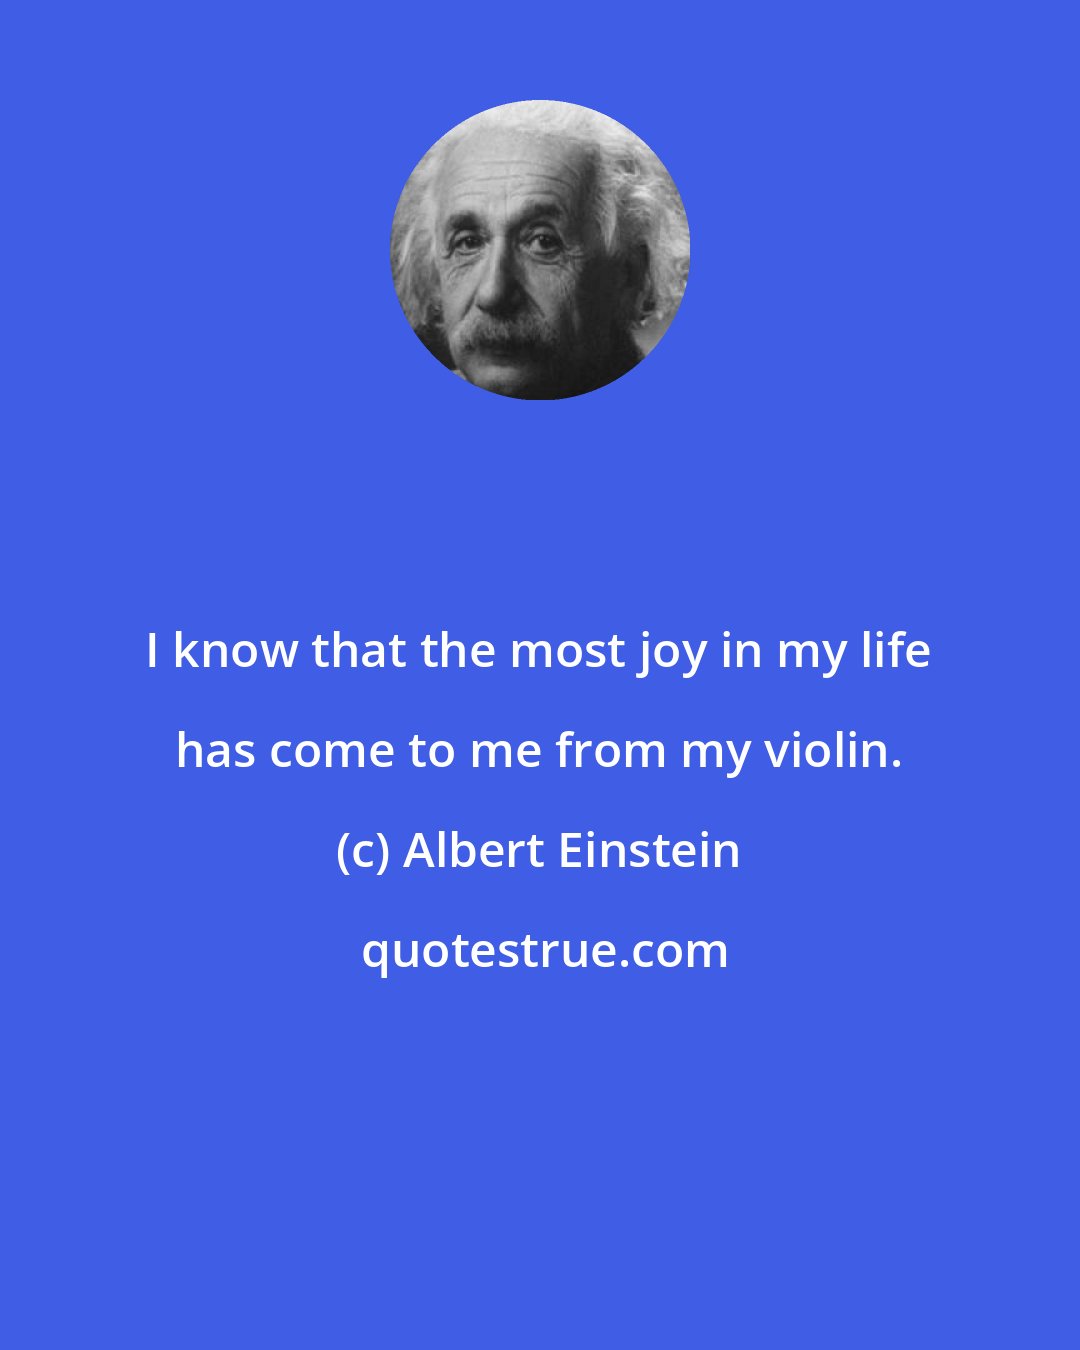 Albert Einstein: I know that the most joy in my life has come to me from my violin.